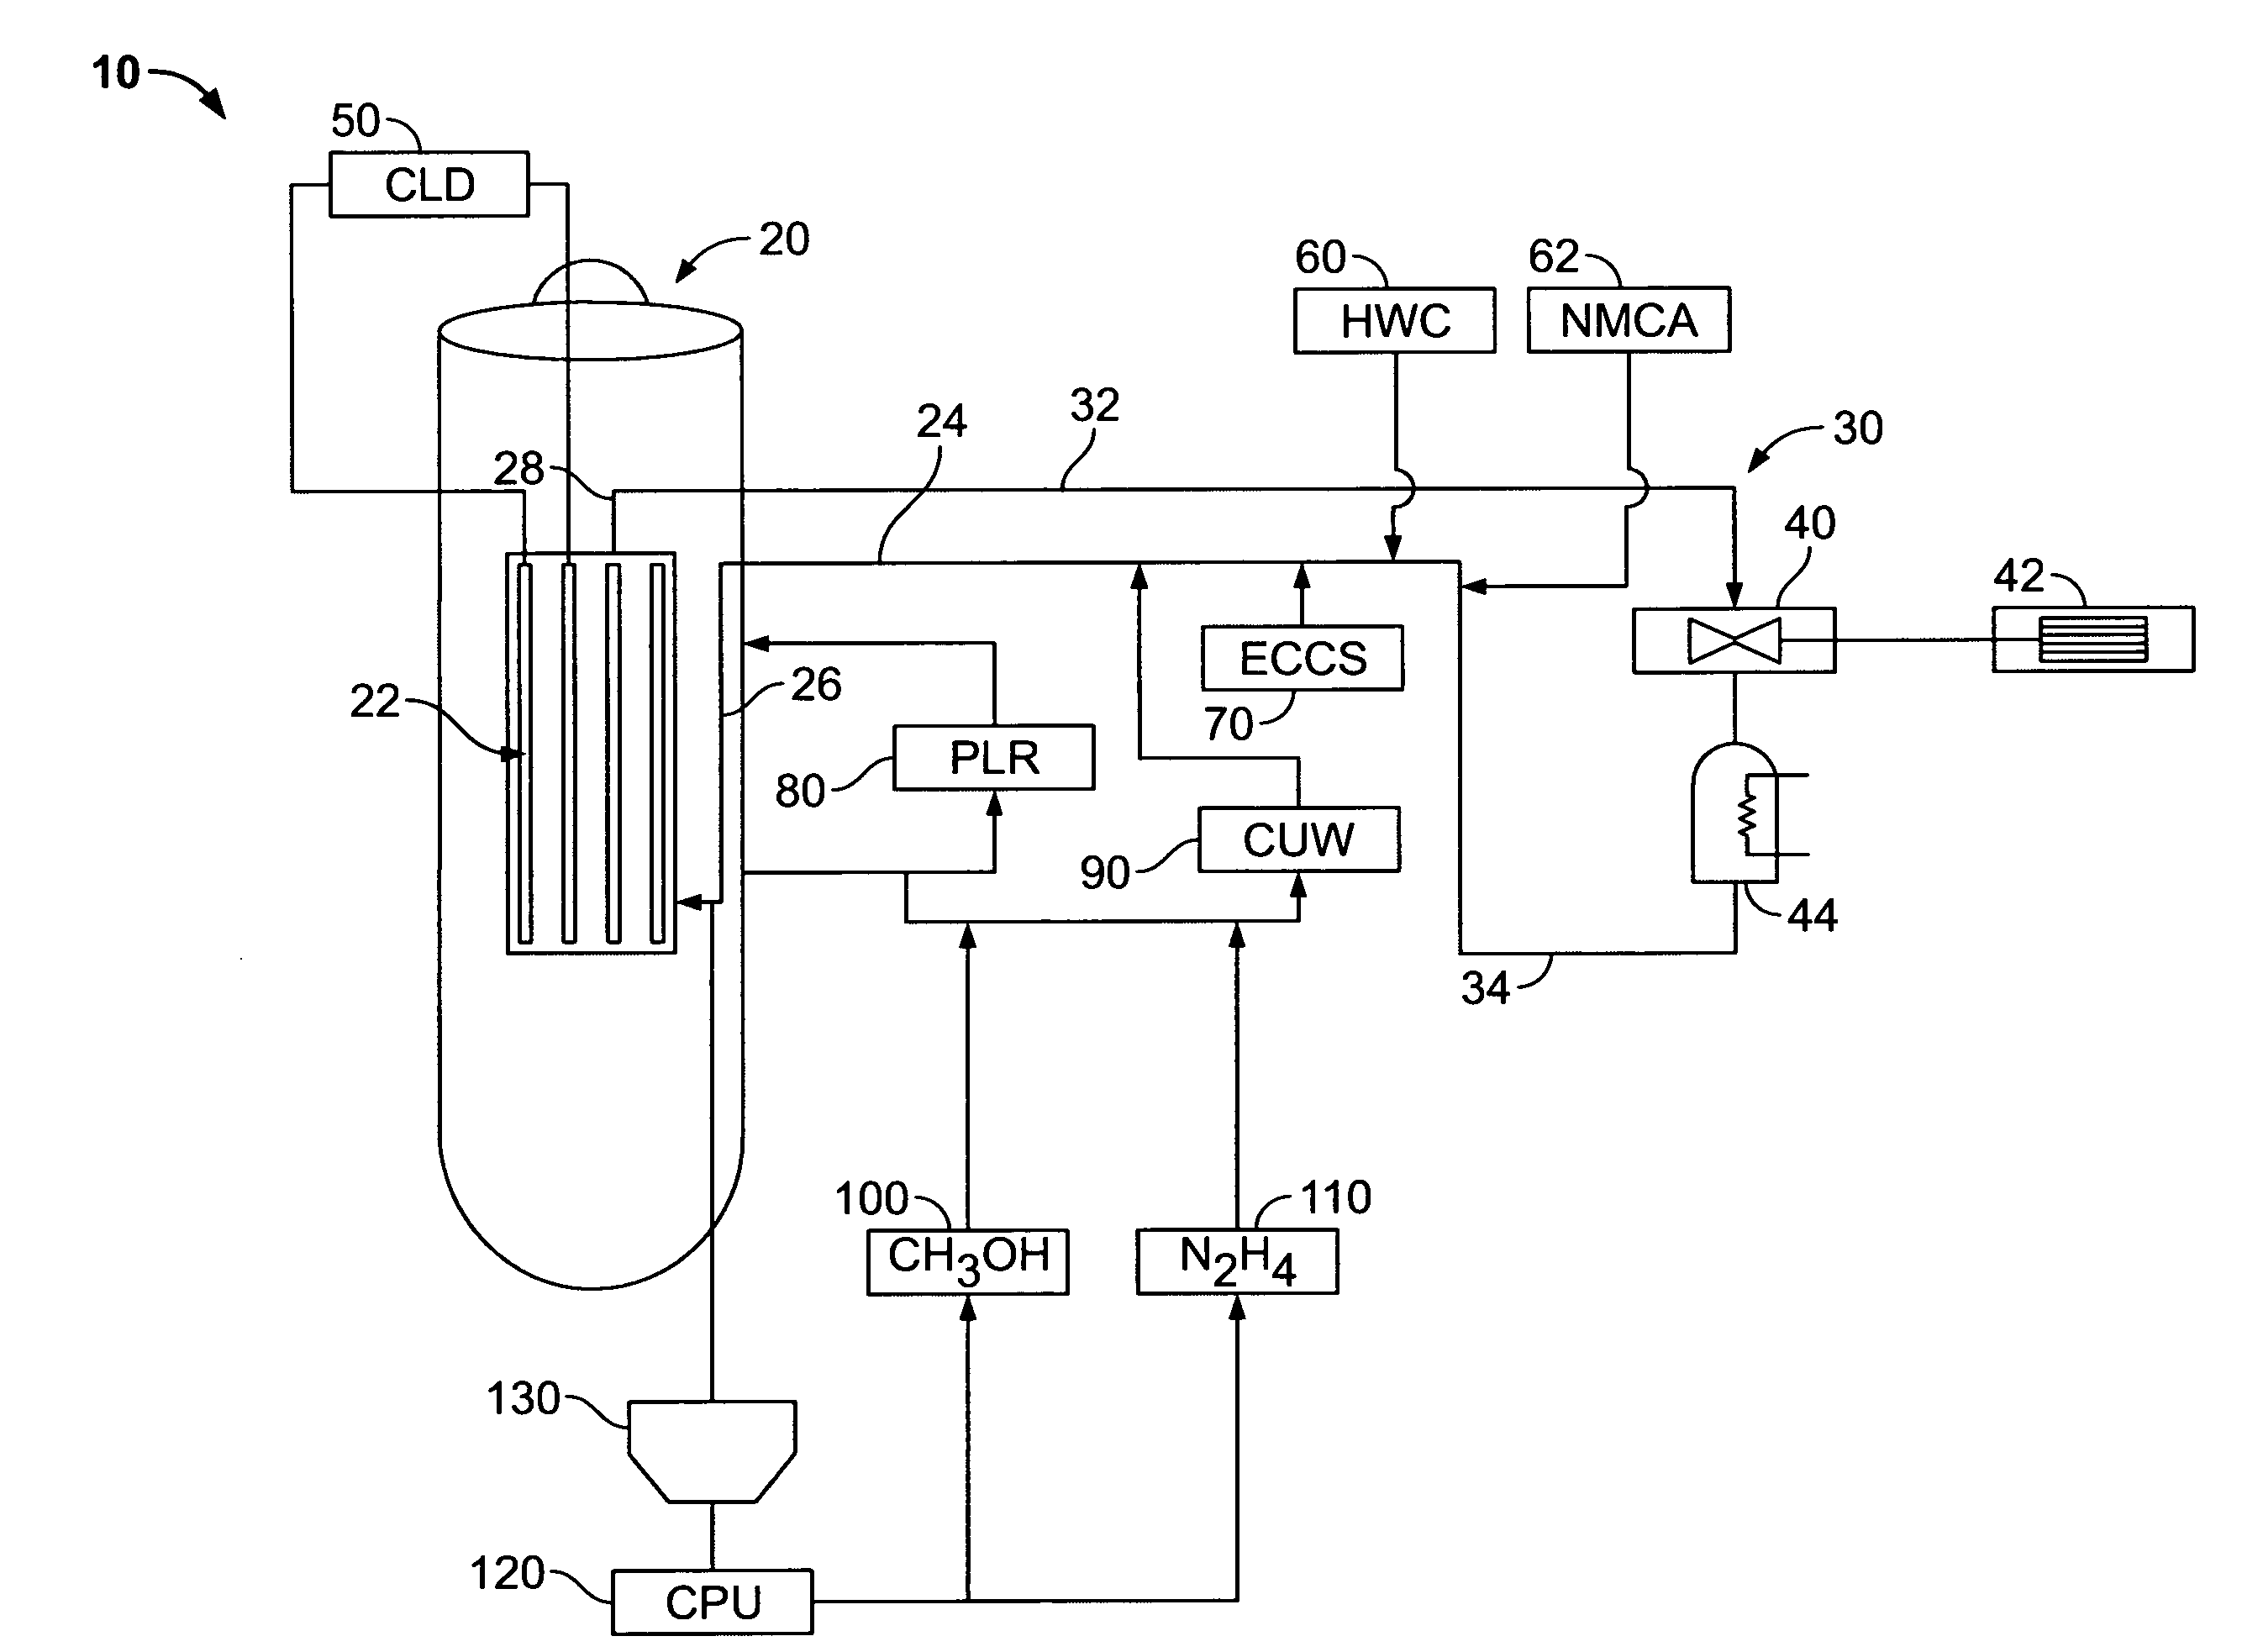 Boiling water reactor nuclear power plant with alcohol injection